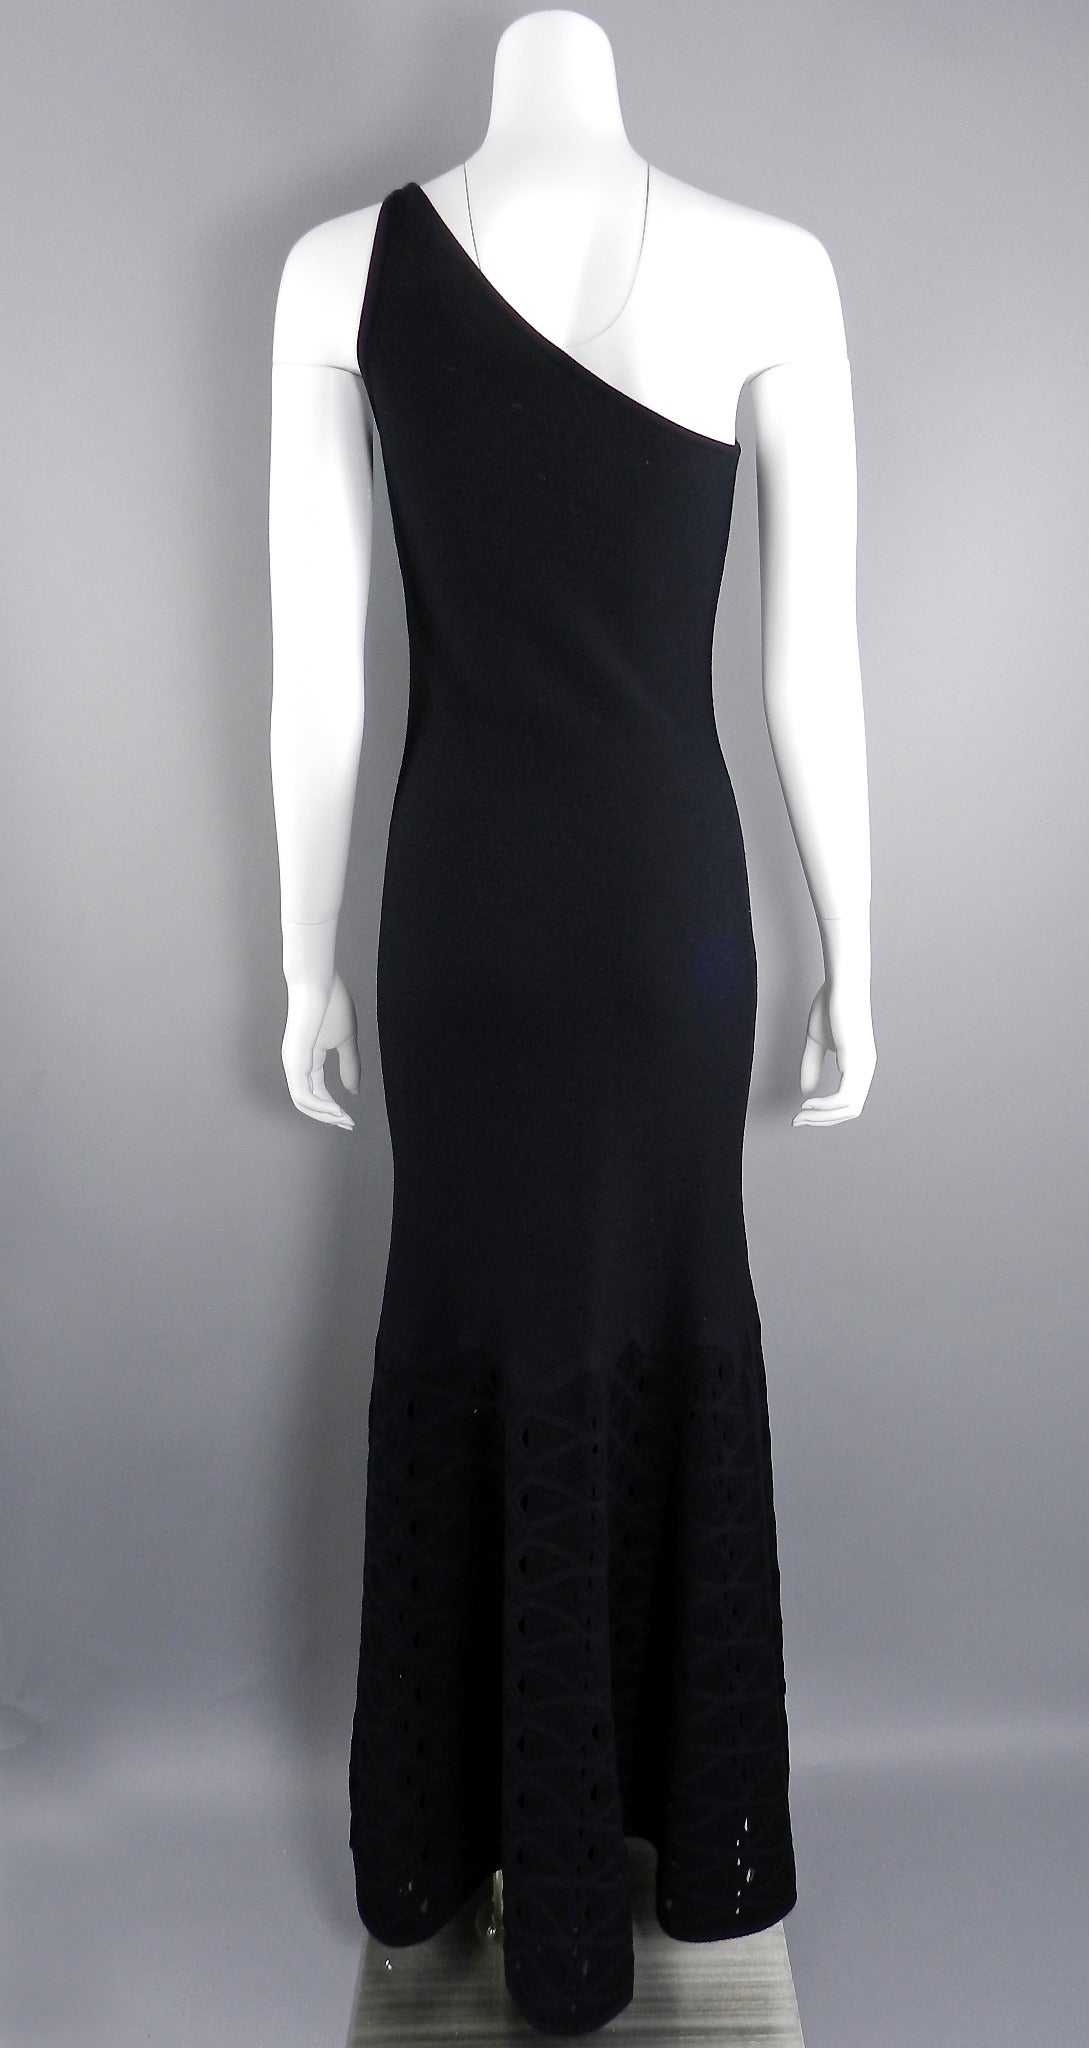 Chanel long black stretch jersey one shoulder gown. Clingy stretch fabric composed of 67% rayon, 33 poly. Skirt hem flares out with pierced mesh design. Excellent condition. Tagged size FR 38 (USA 6). To fit 34